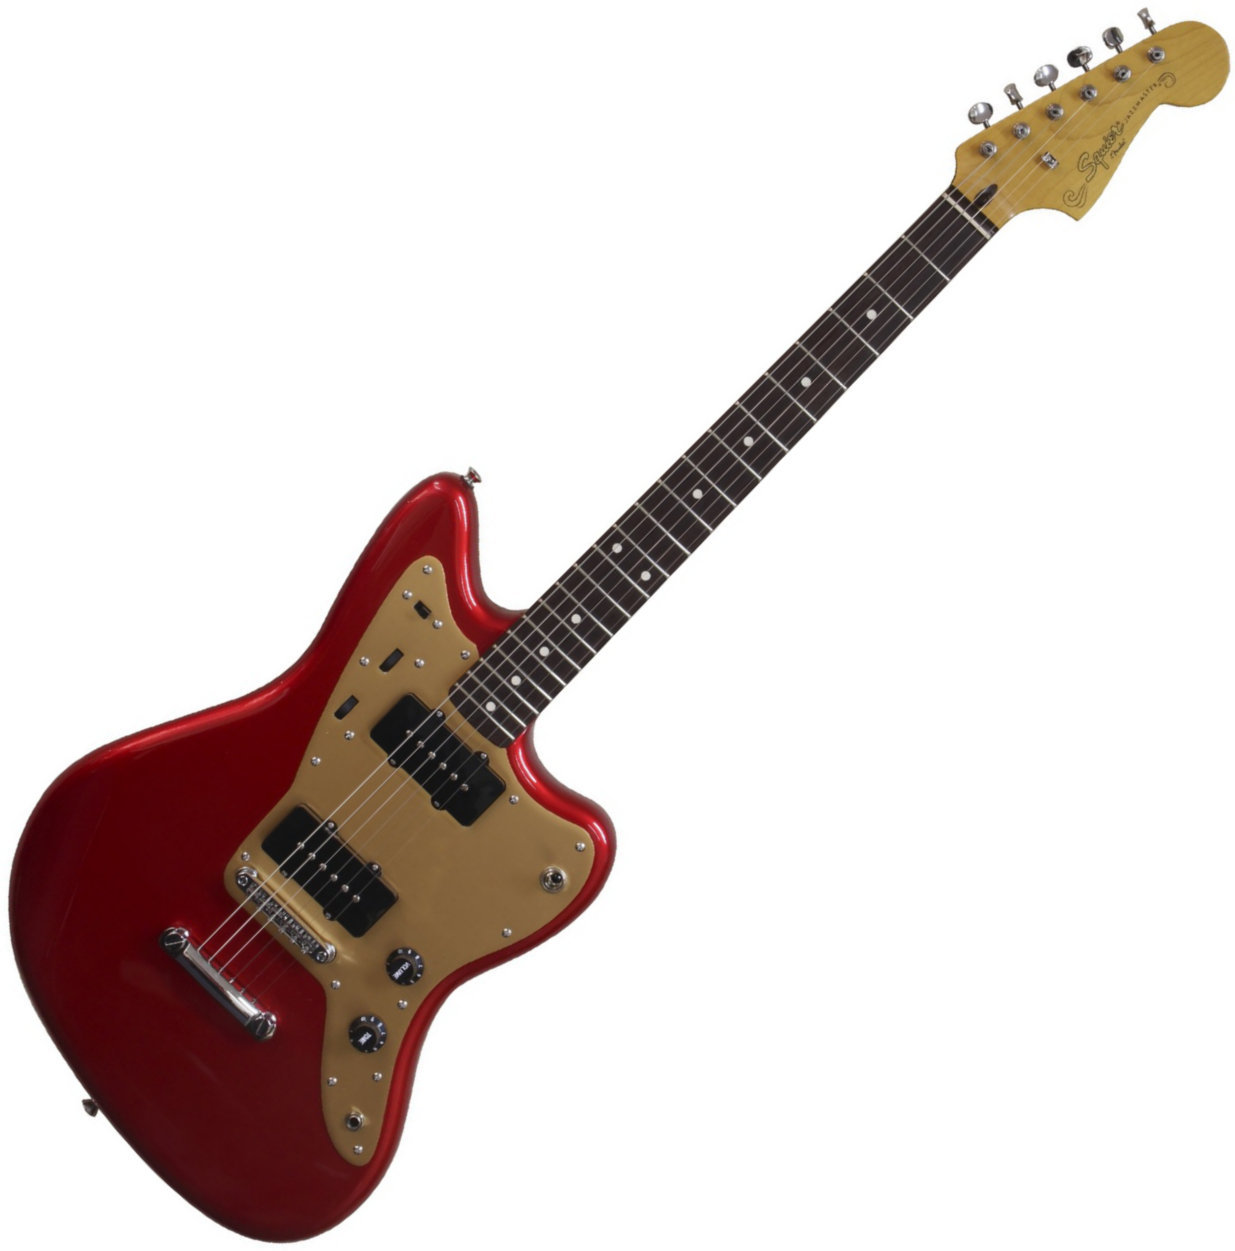 Electric guitar Fender Squier Deluxe Jazzmaster RW Candy Apple Red